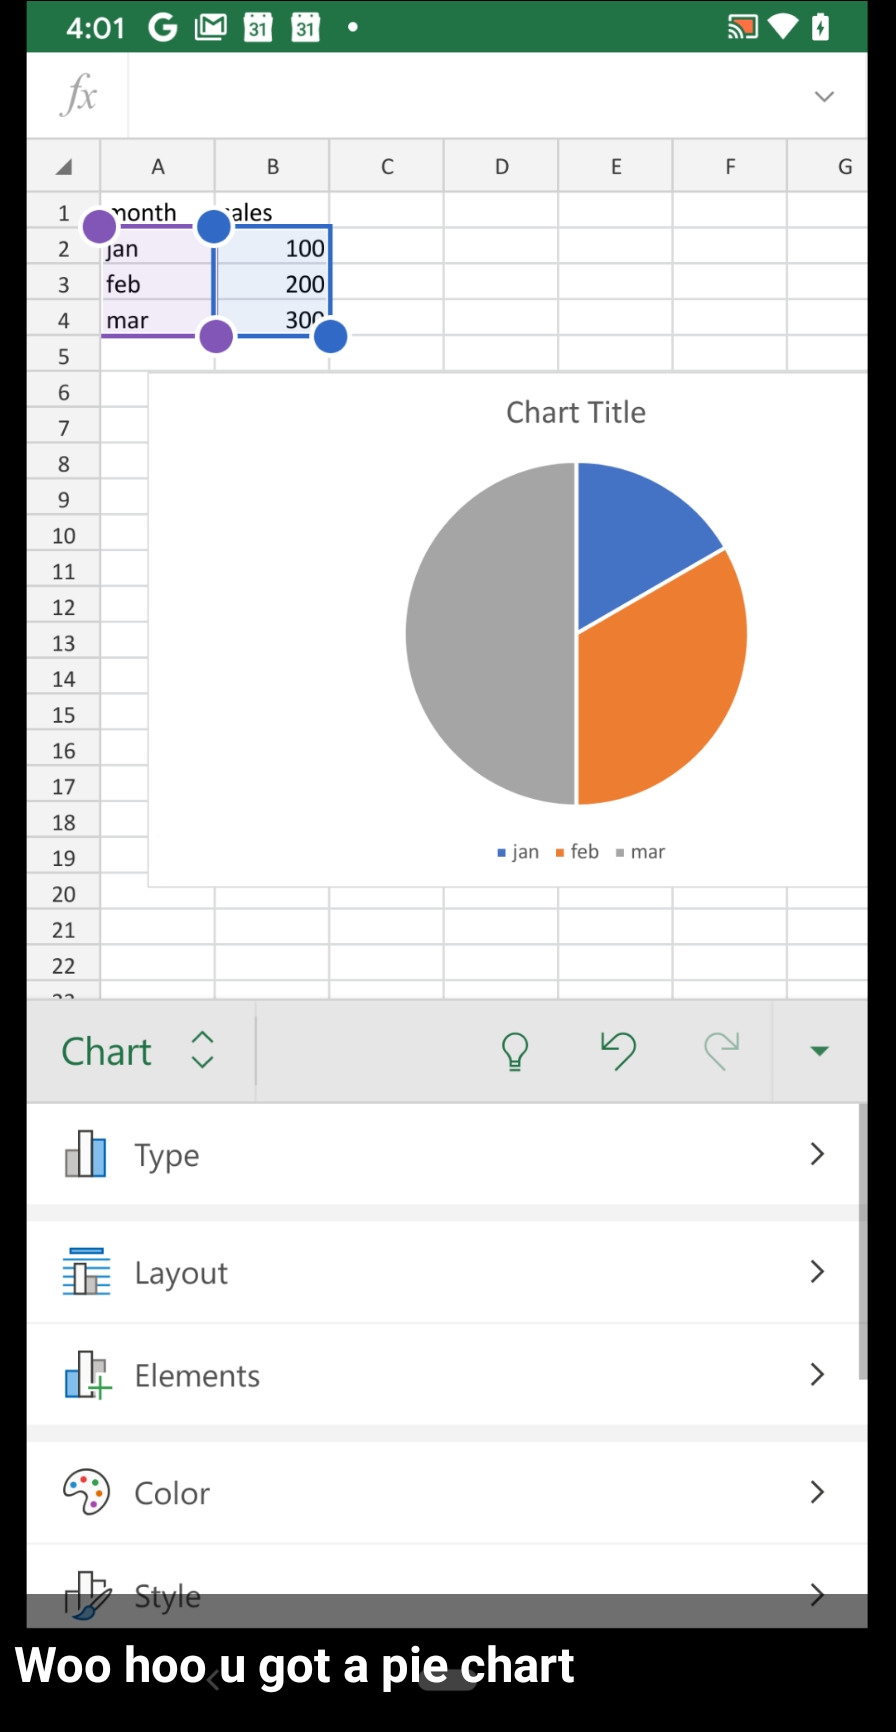 how to make a pie chart in excel for all states